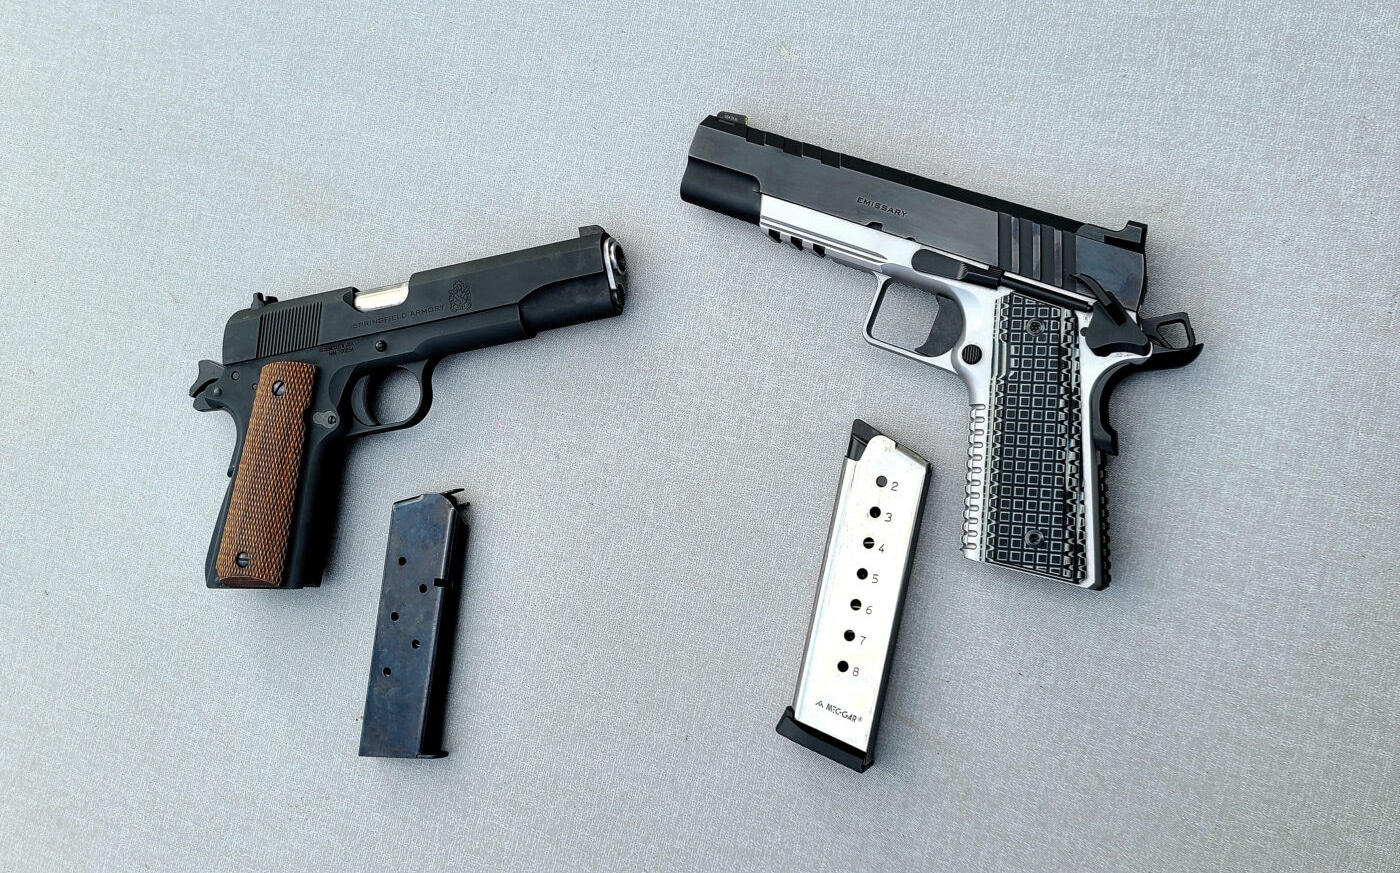 Springfield Armory Mil-Spec 1911 and Emissary pistols with magazines